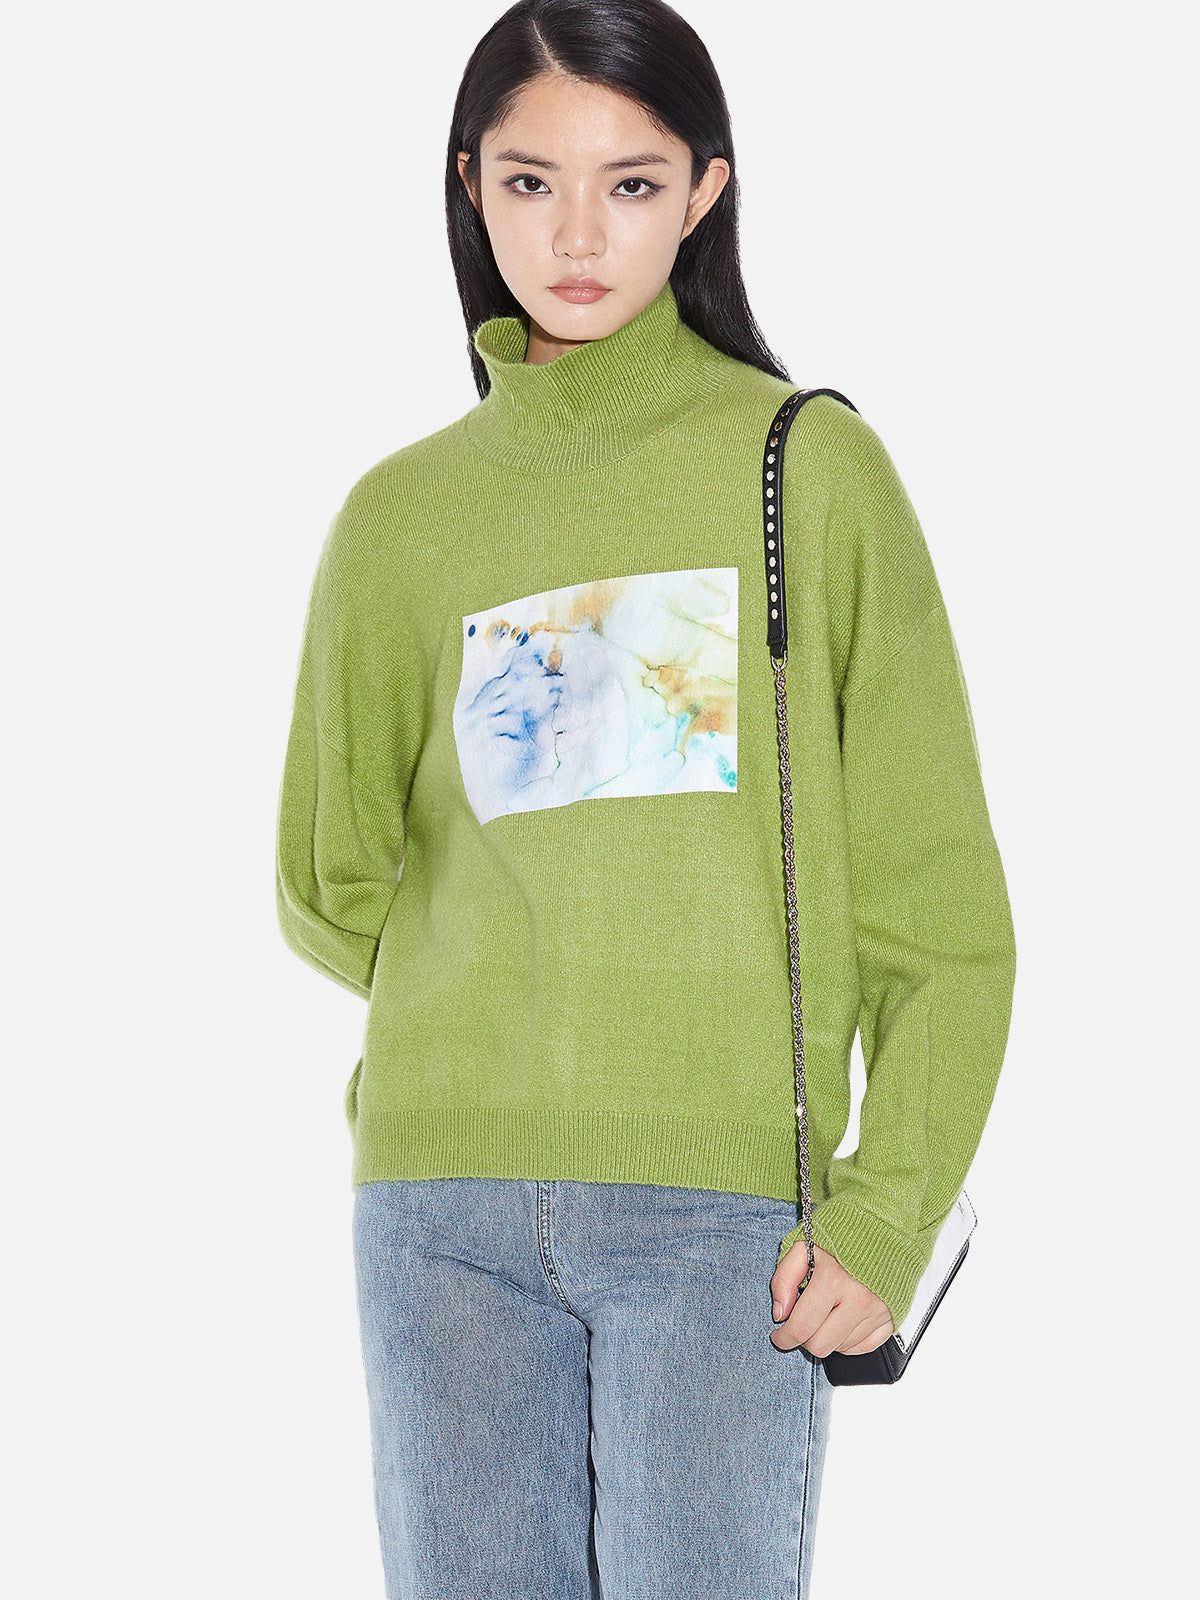 Ribbed Turtleneck Contrast Printed Loose Knit Sweater